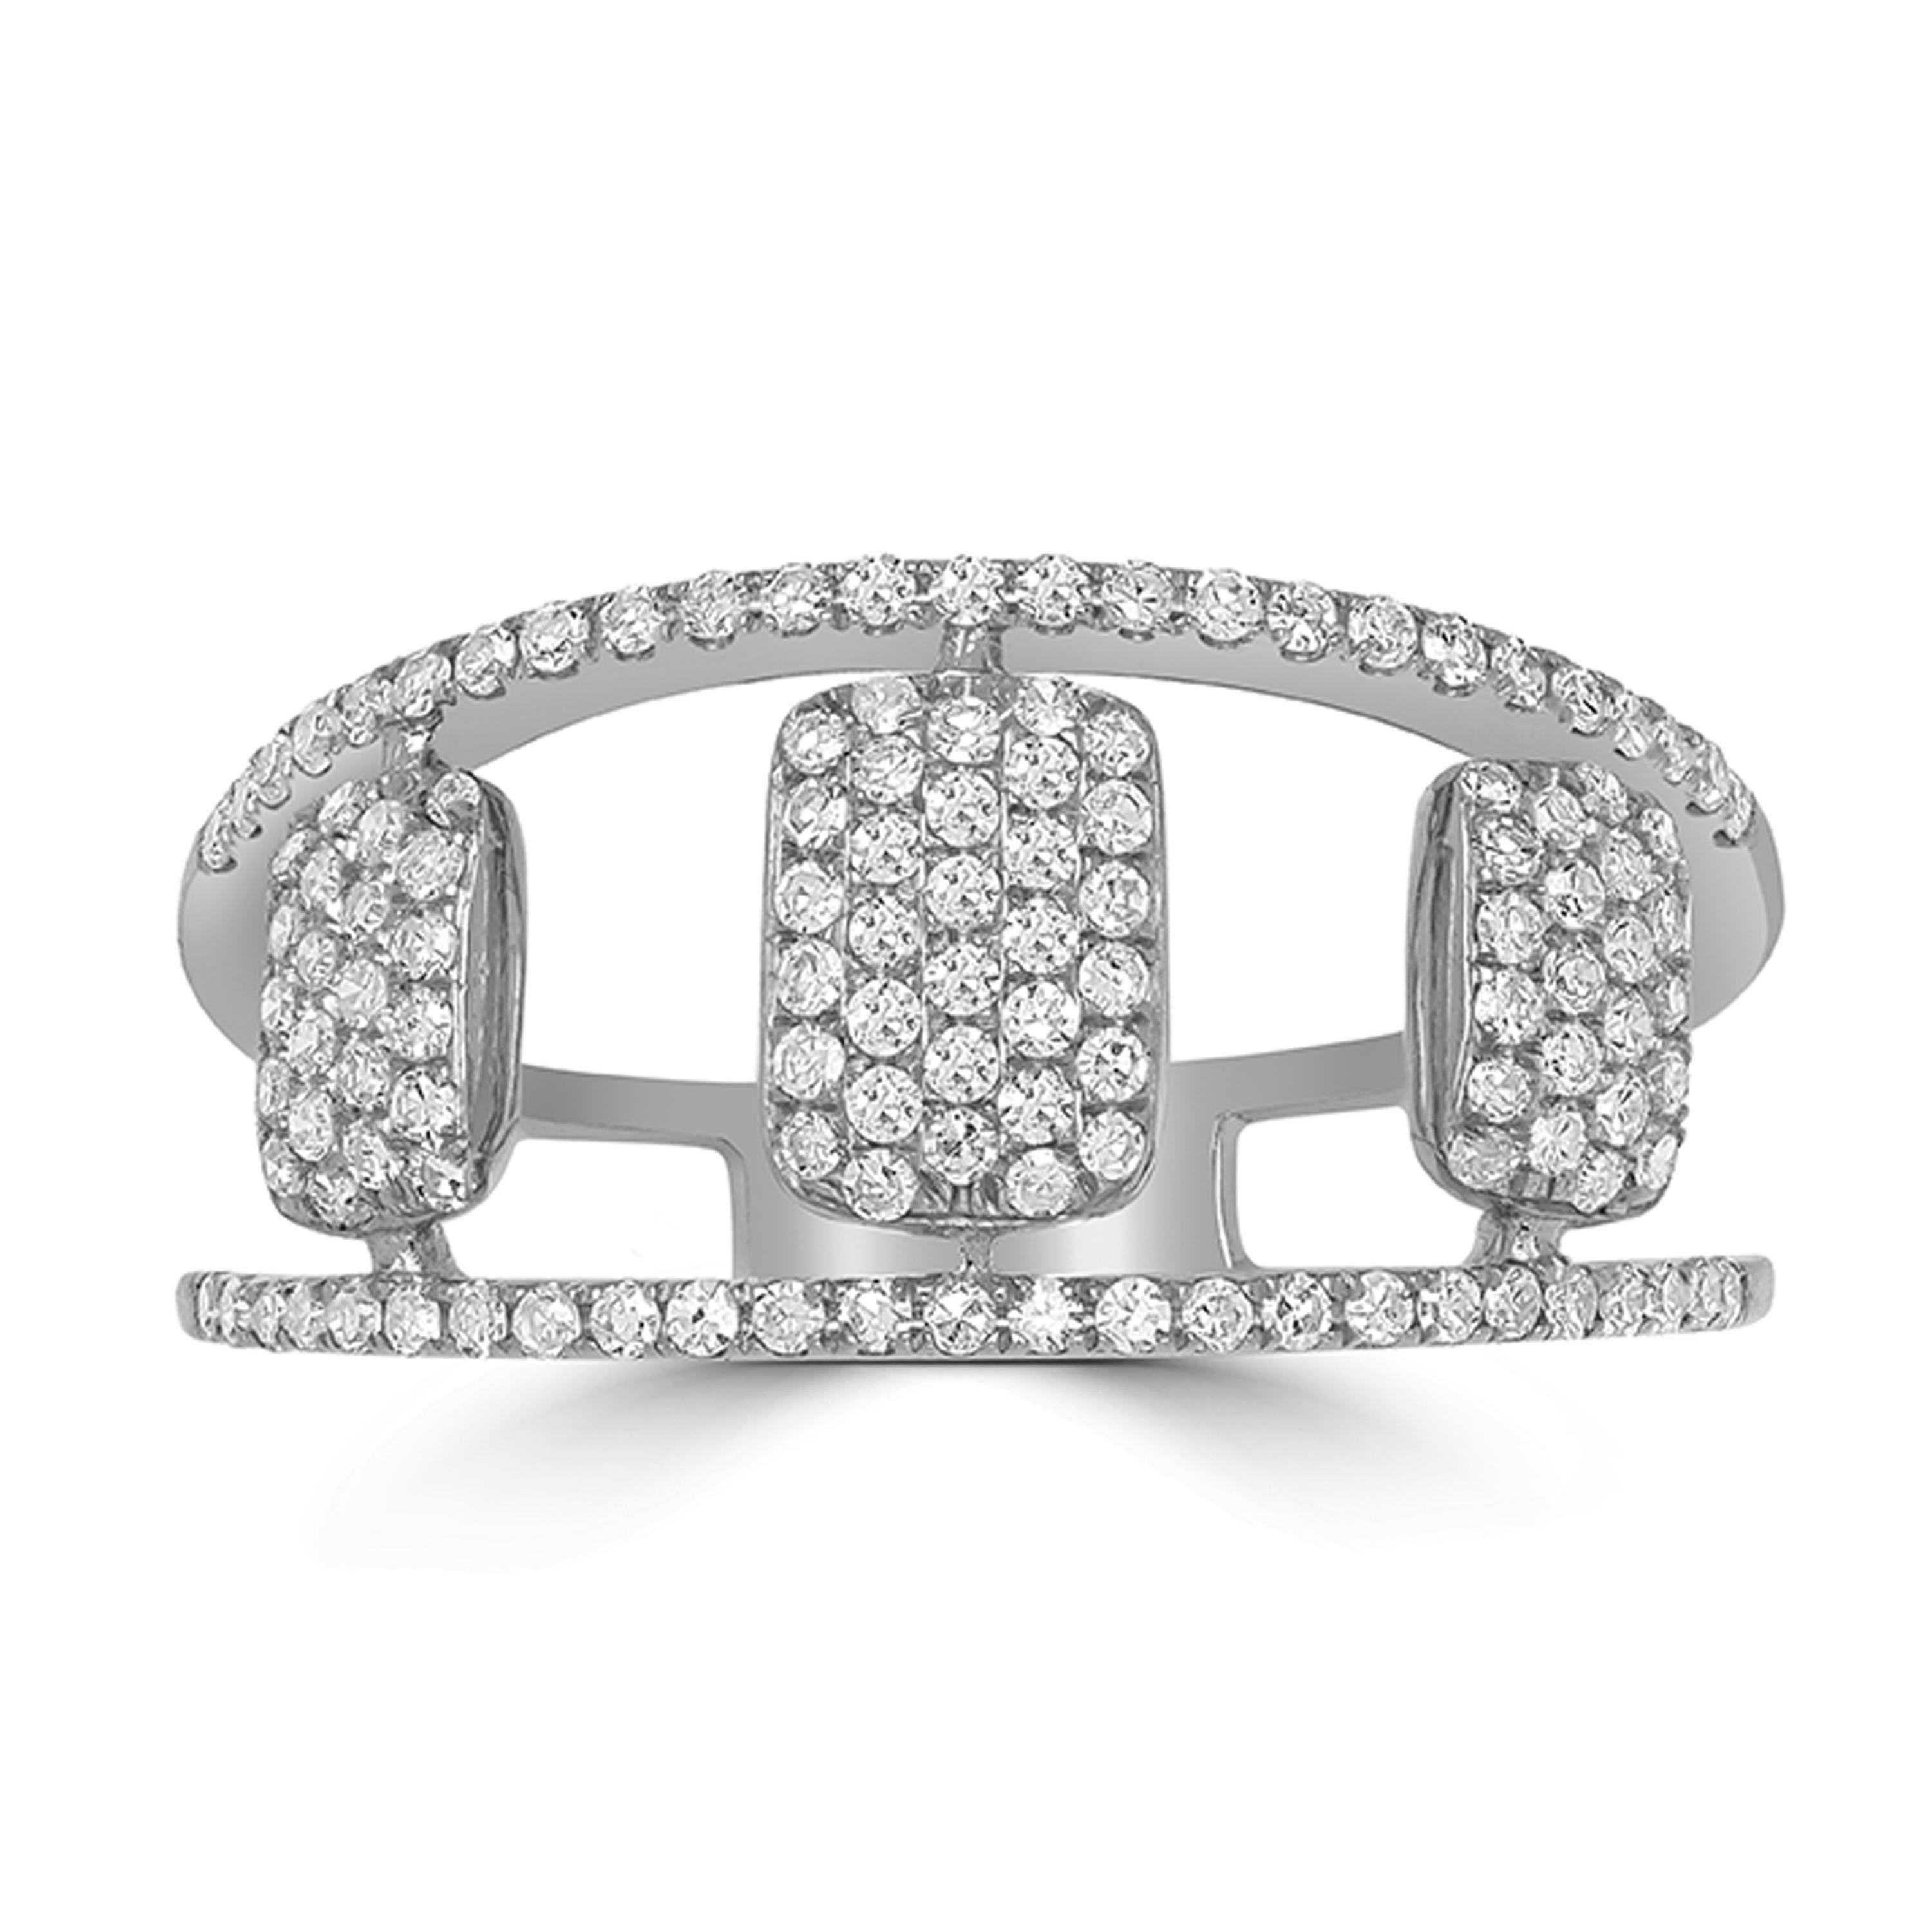 Glamorously attractive, this Luxle split-shank ring in 14K white gold is featured with rectangle-shaped motifs embellished with diamonds. Each ring is made with 126 round diamonds set in micro pave.

Please follow the Luxury Jewels storefront to